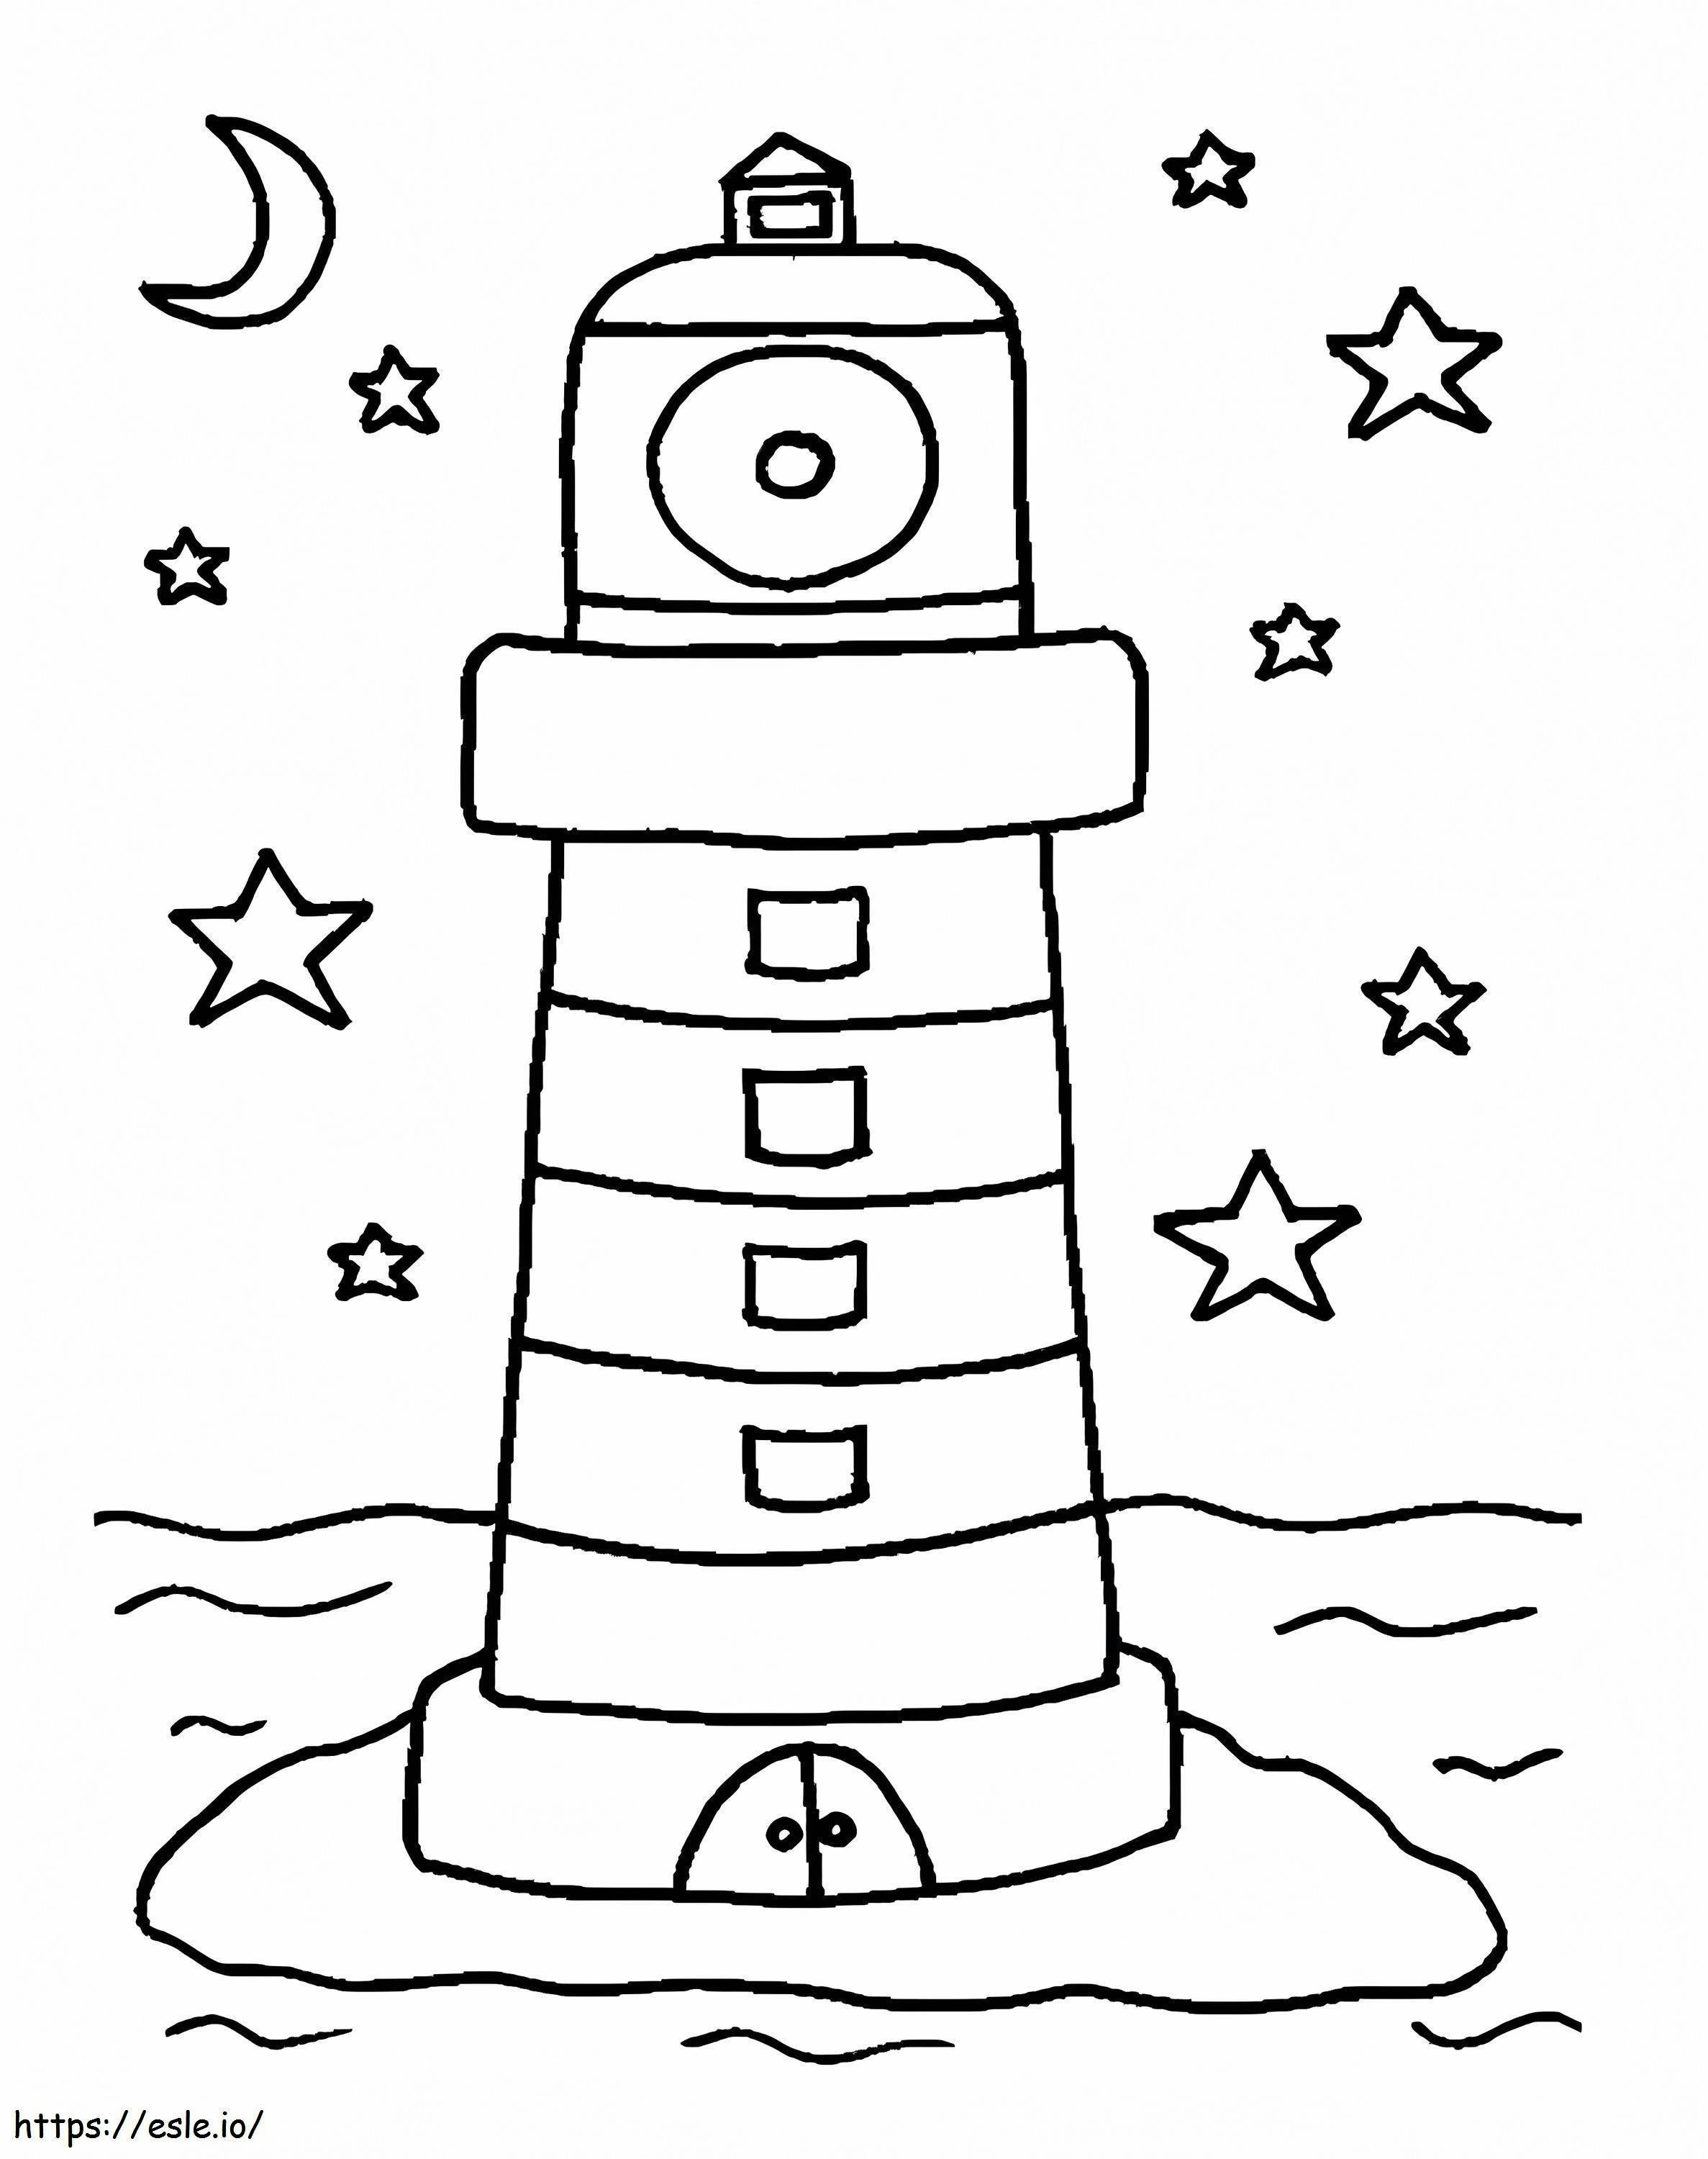 Lighthouse With Moon And Stars coloring page